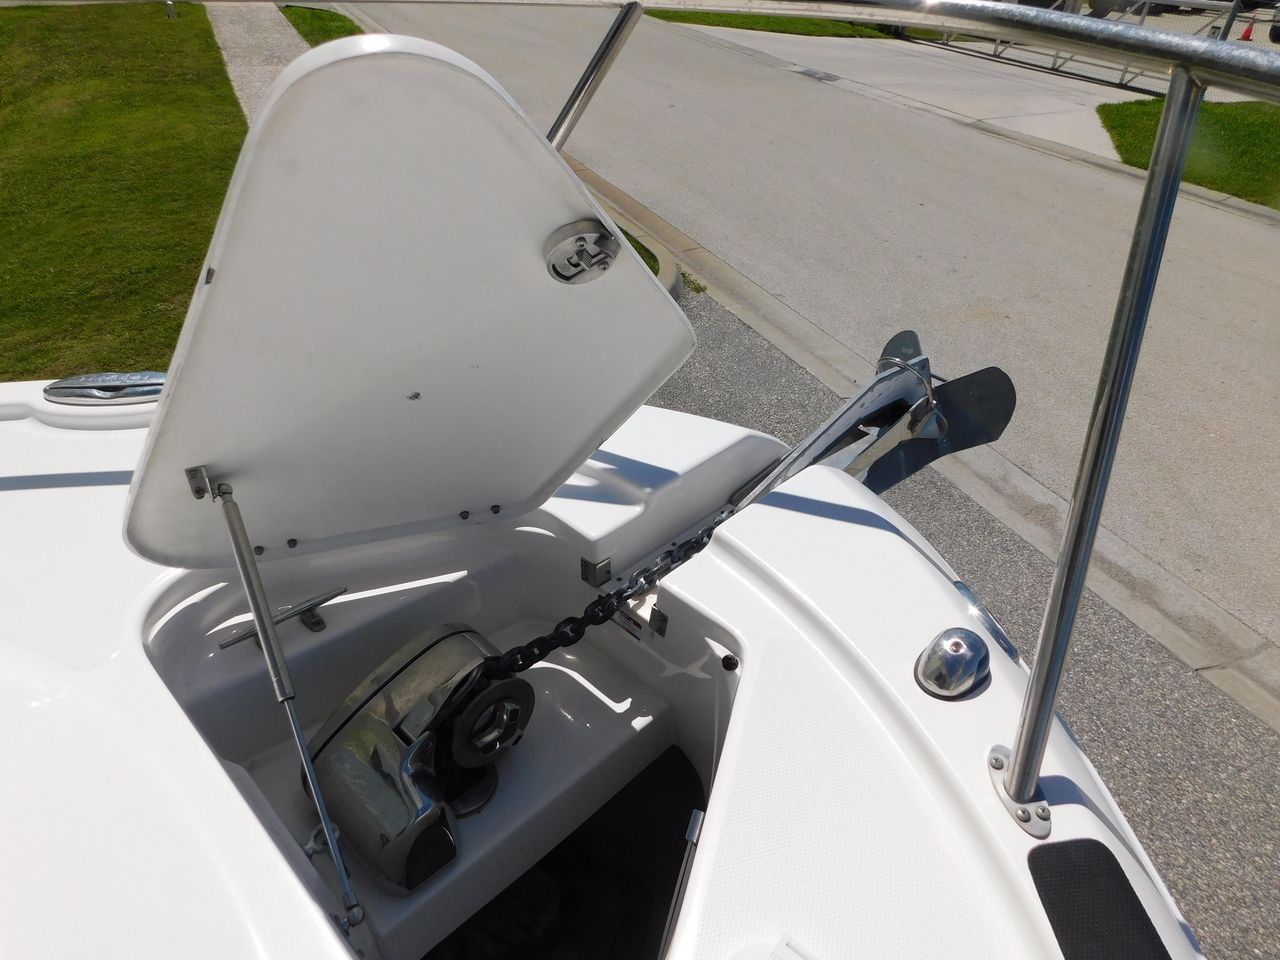 2014 Robalo R 305 wa Power boat for sale in Berlin Hts, OH - image 12 